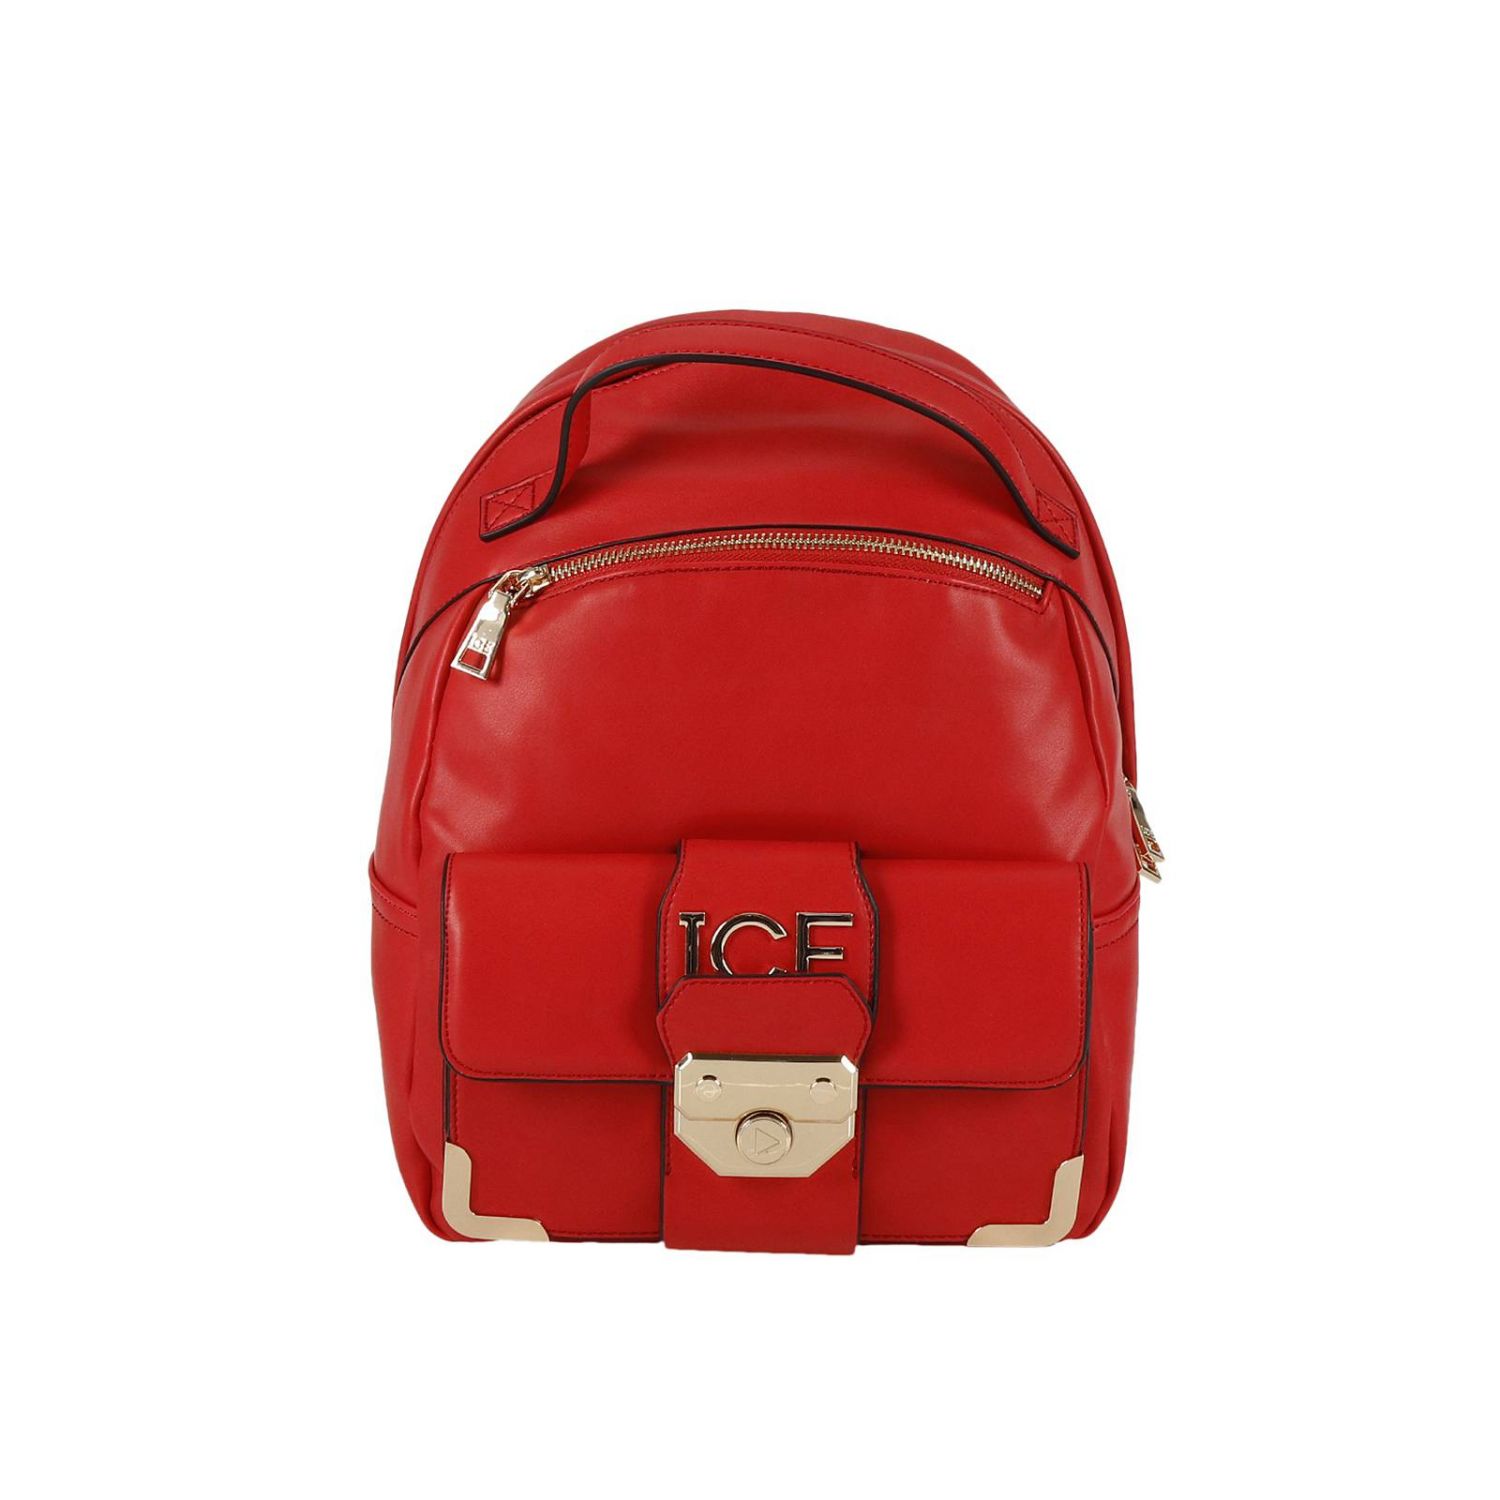 Ice Play Outlet: Shoulder bag women - Red | Backpack Ice Play 7230 6966 ...